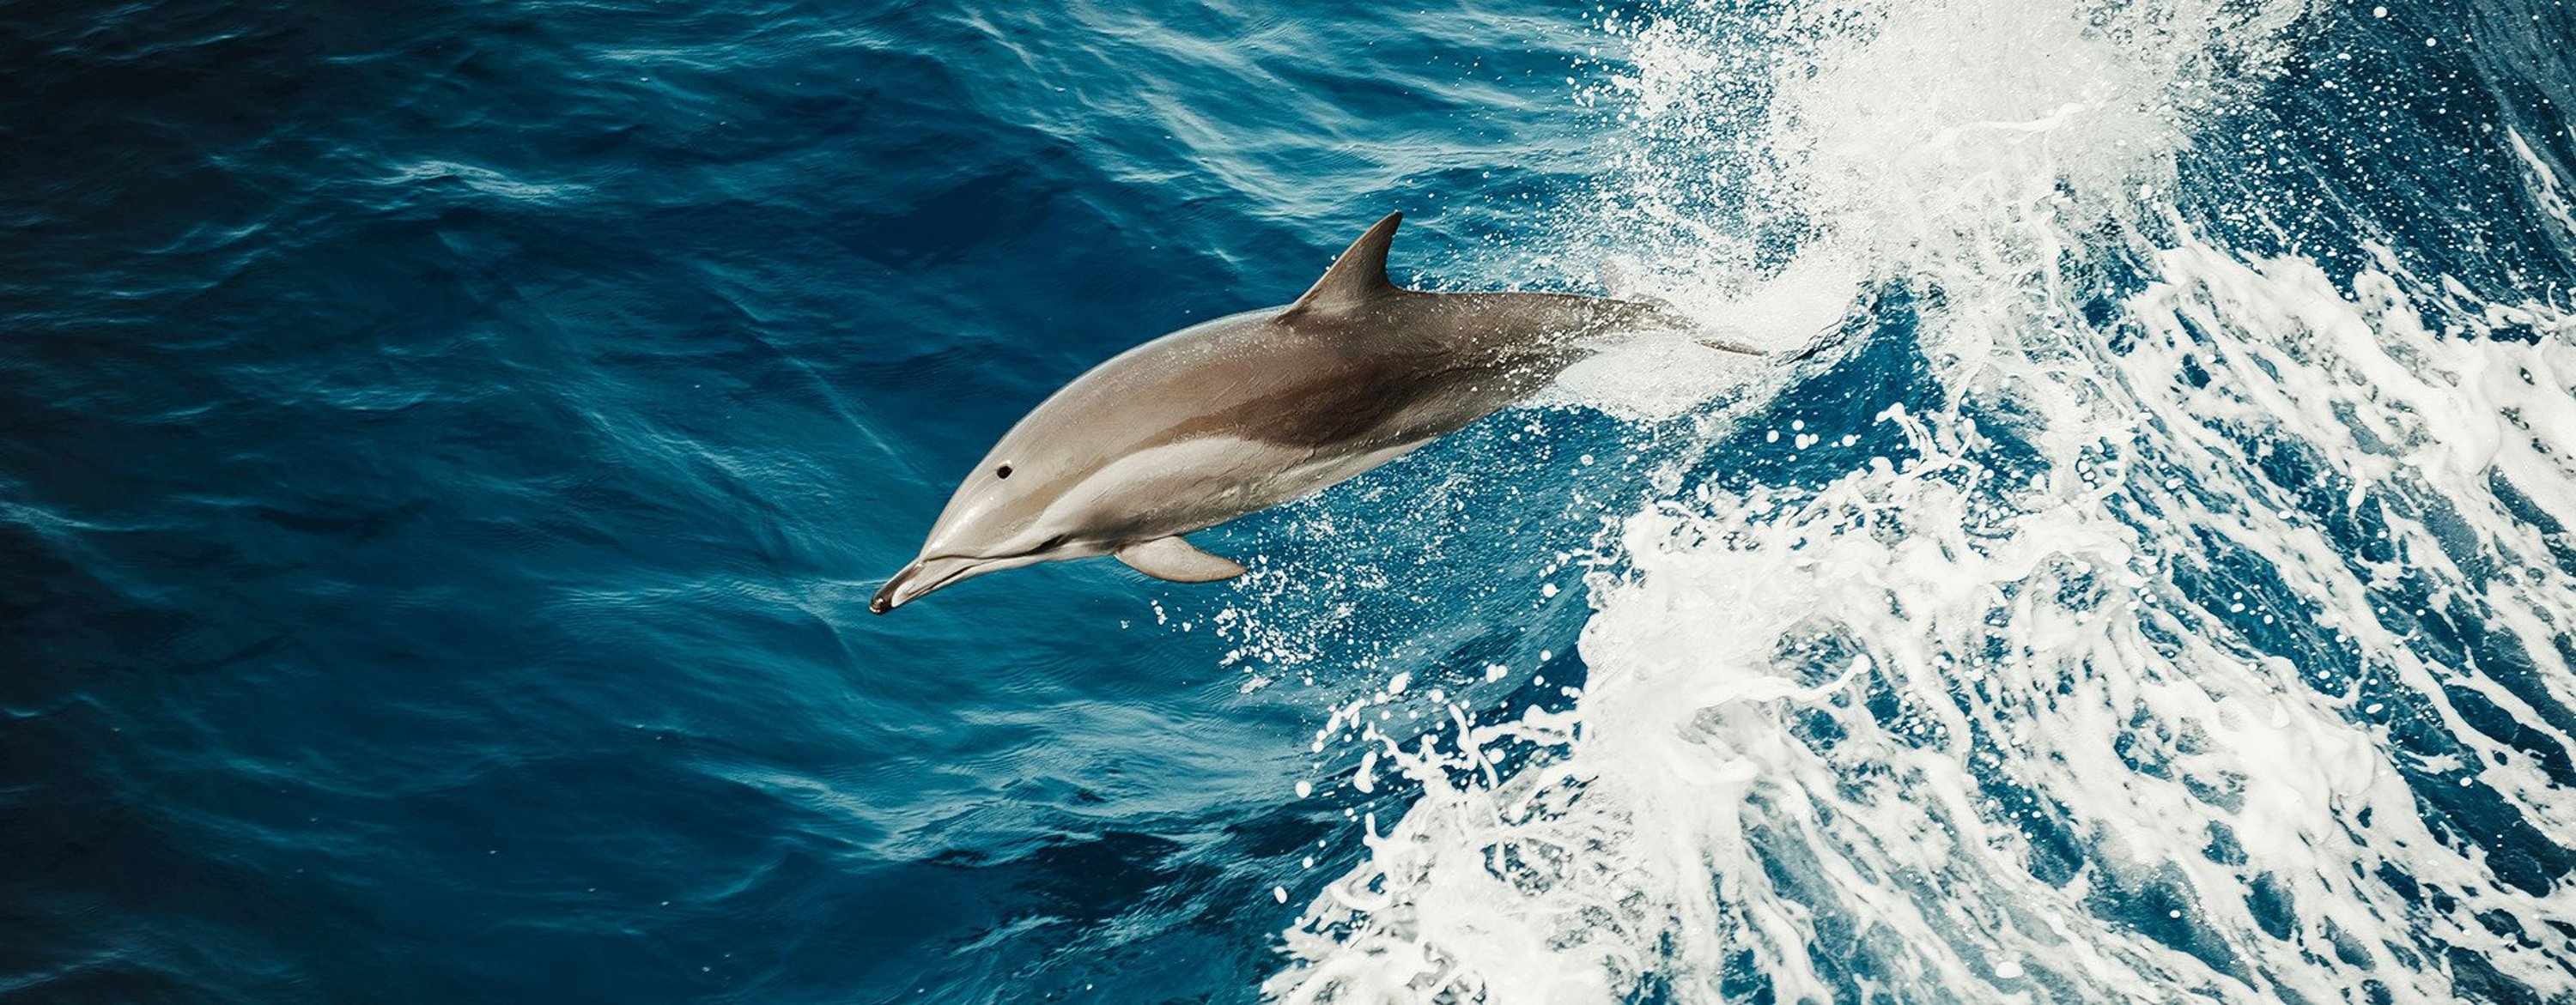 dolphin leaping over ocean waves